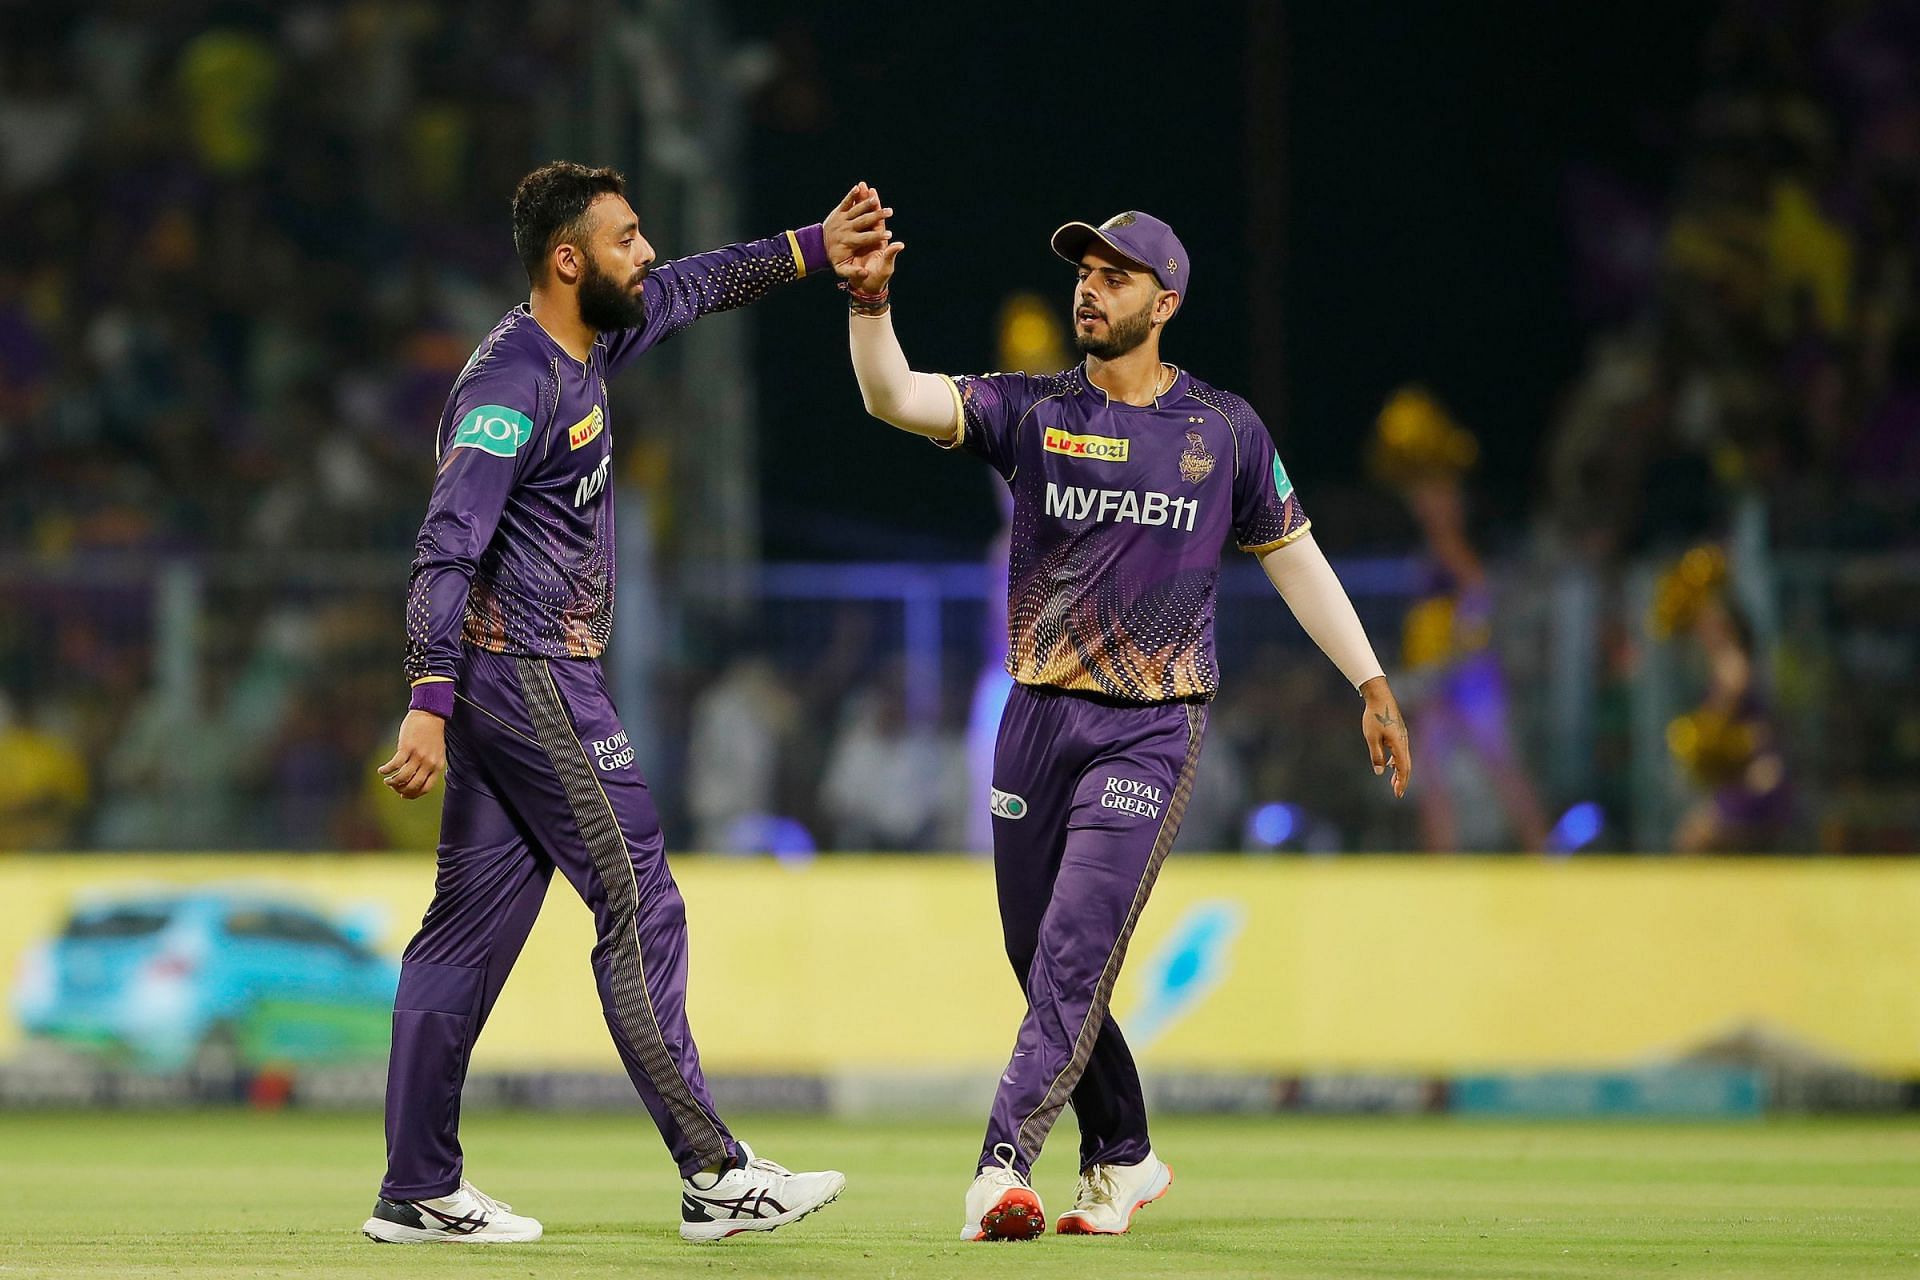 KKR have not found a winning combination this IPL